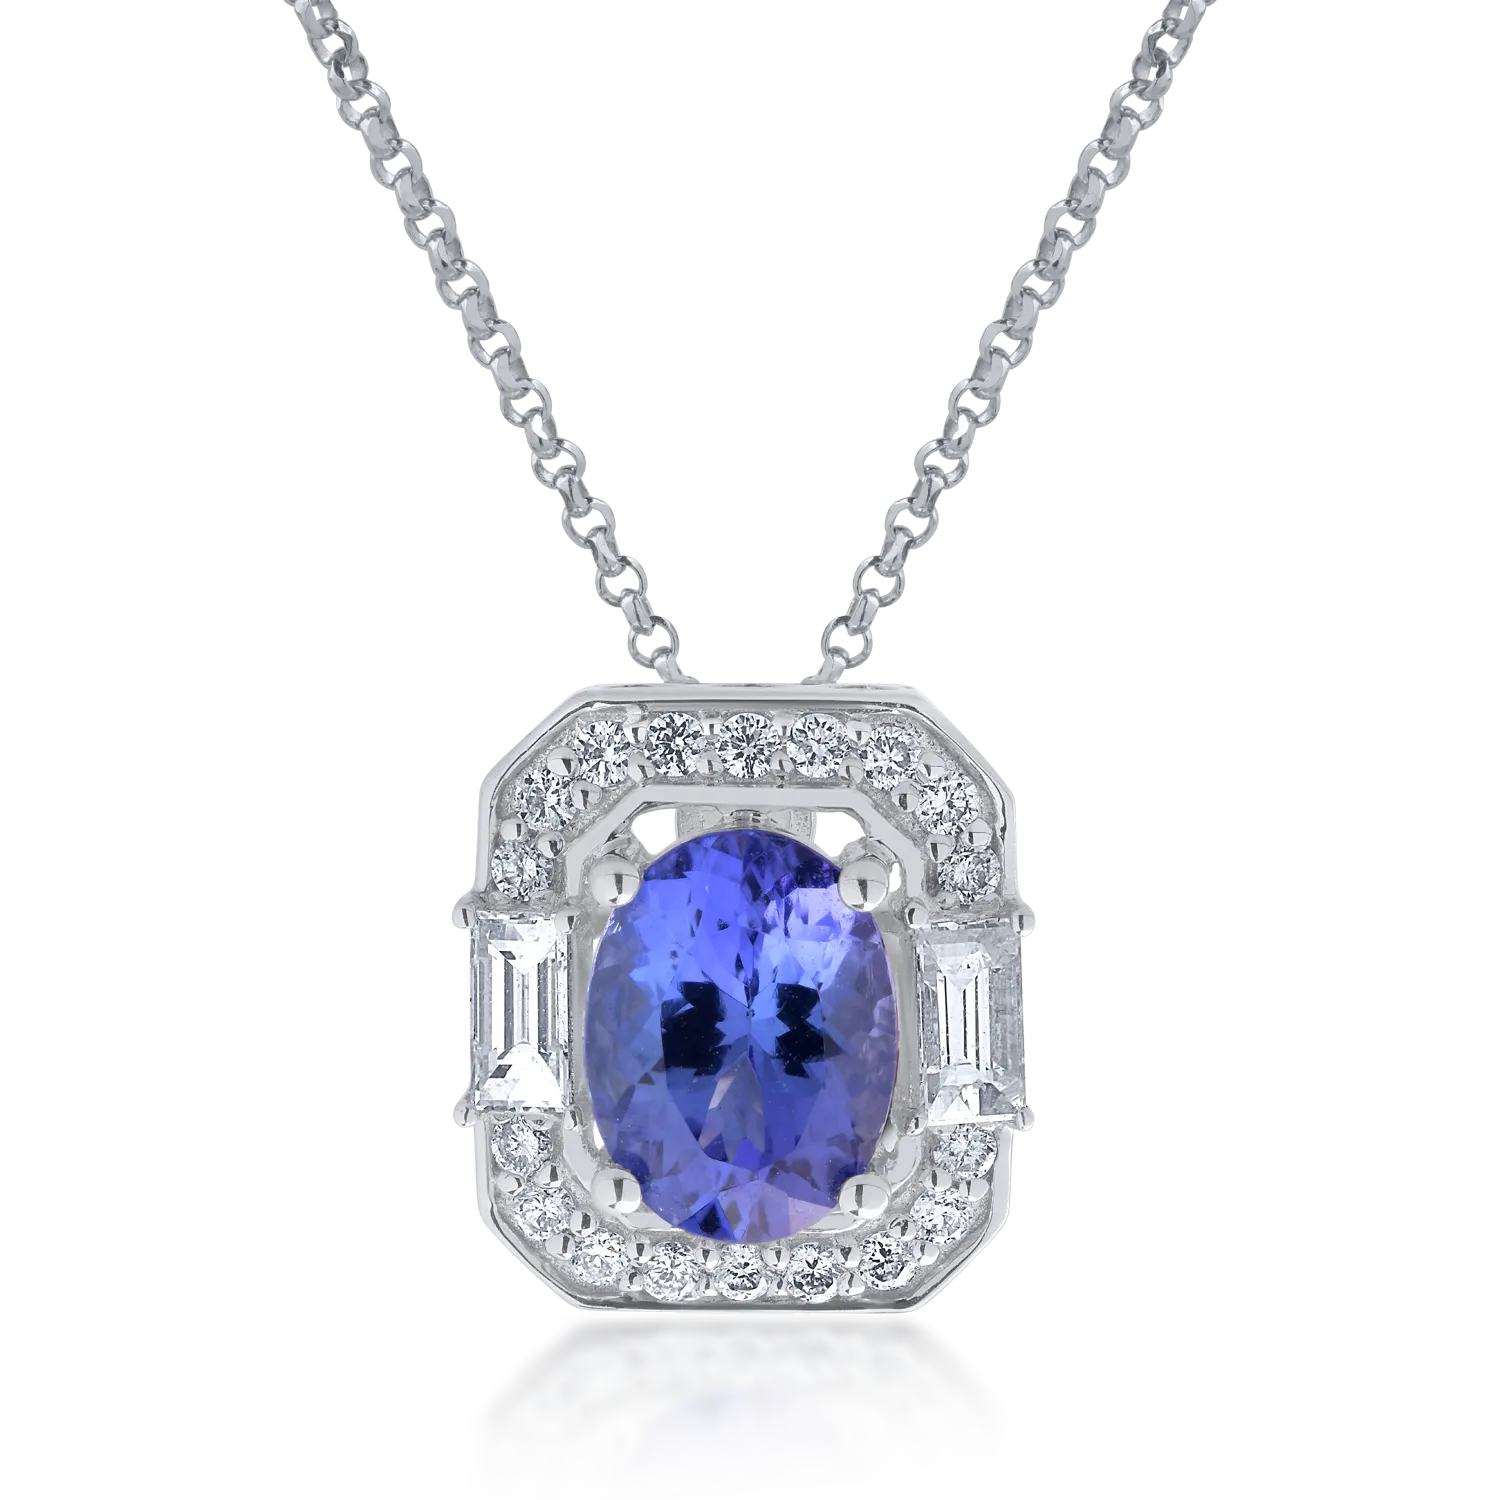 18K white gold pendant necklace with 1.77 ct tanzanite and 0.334 ct diamonds